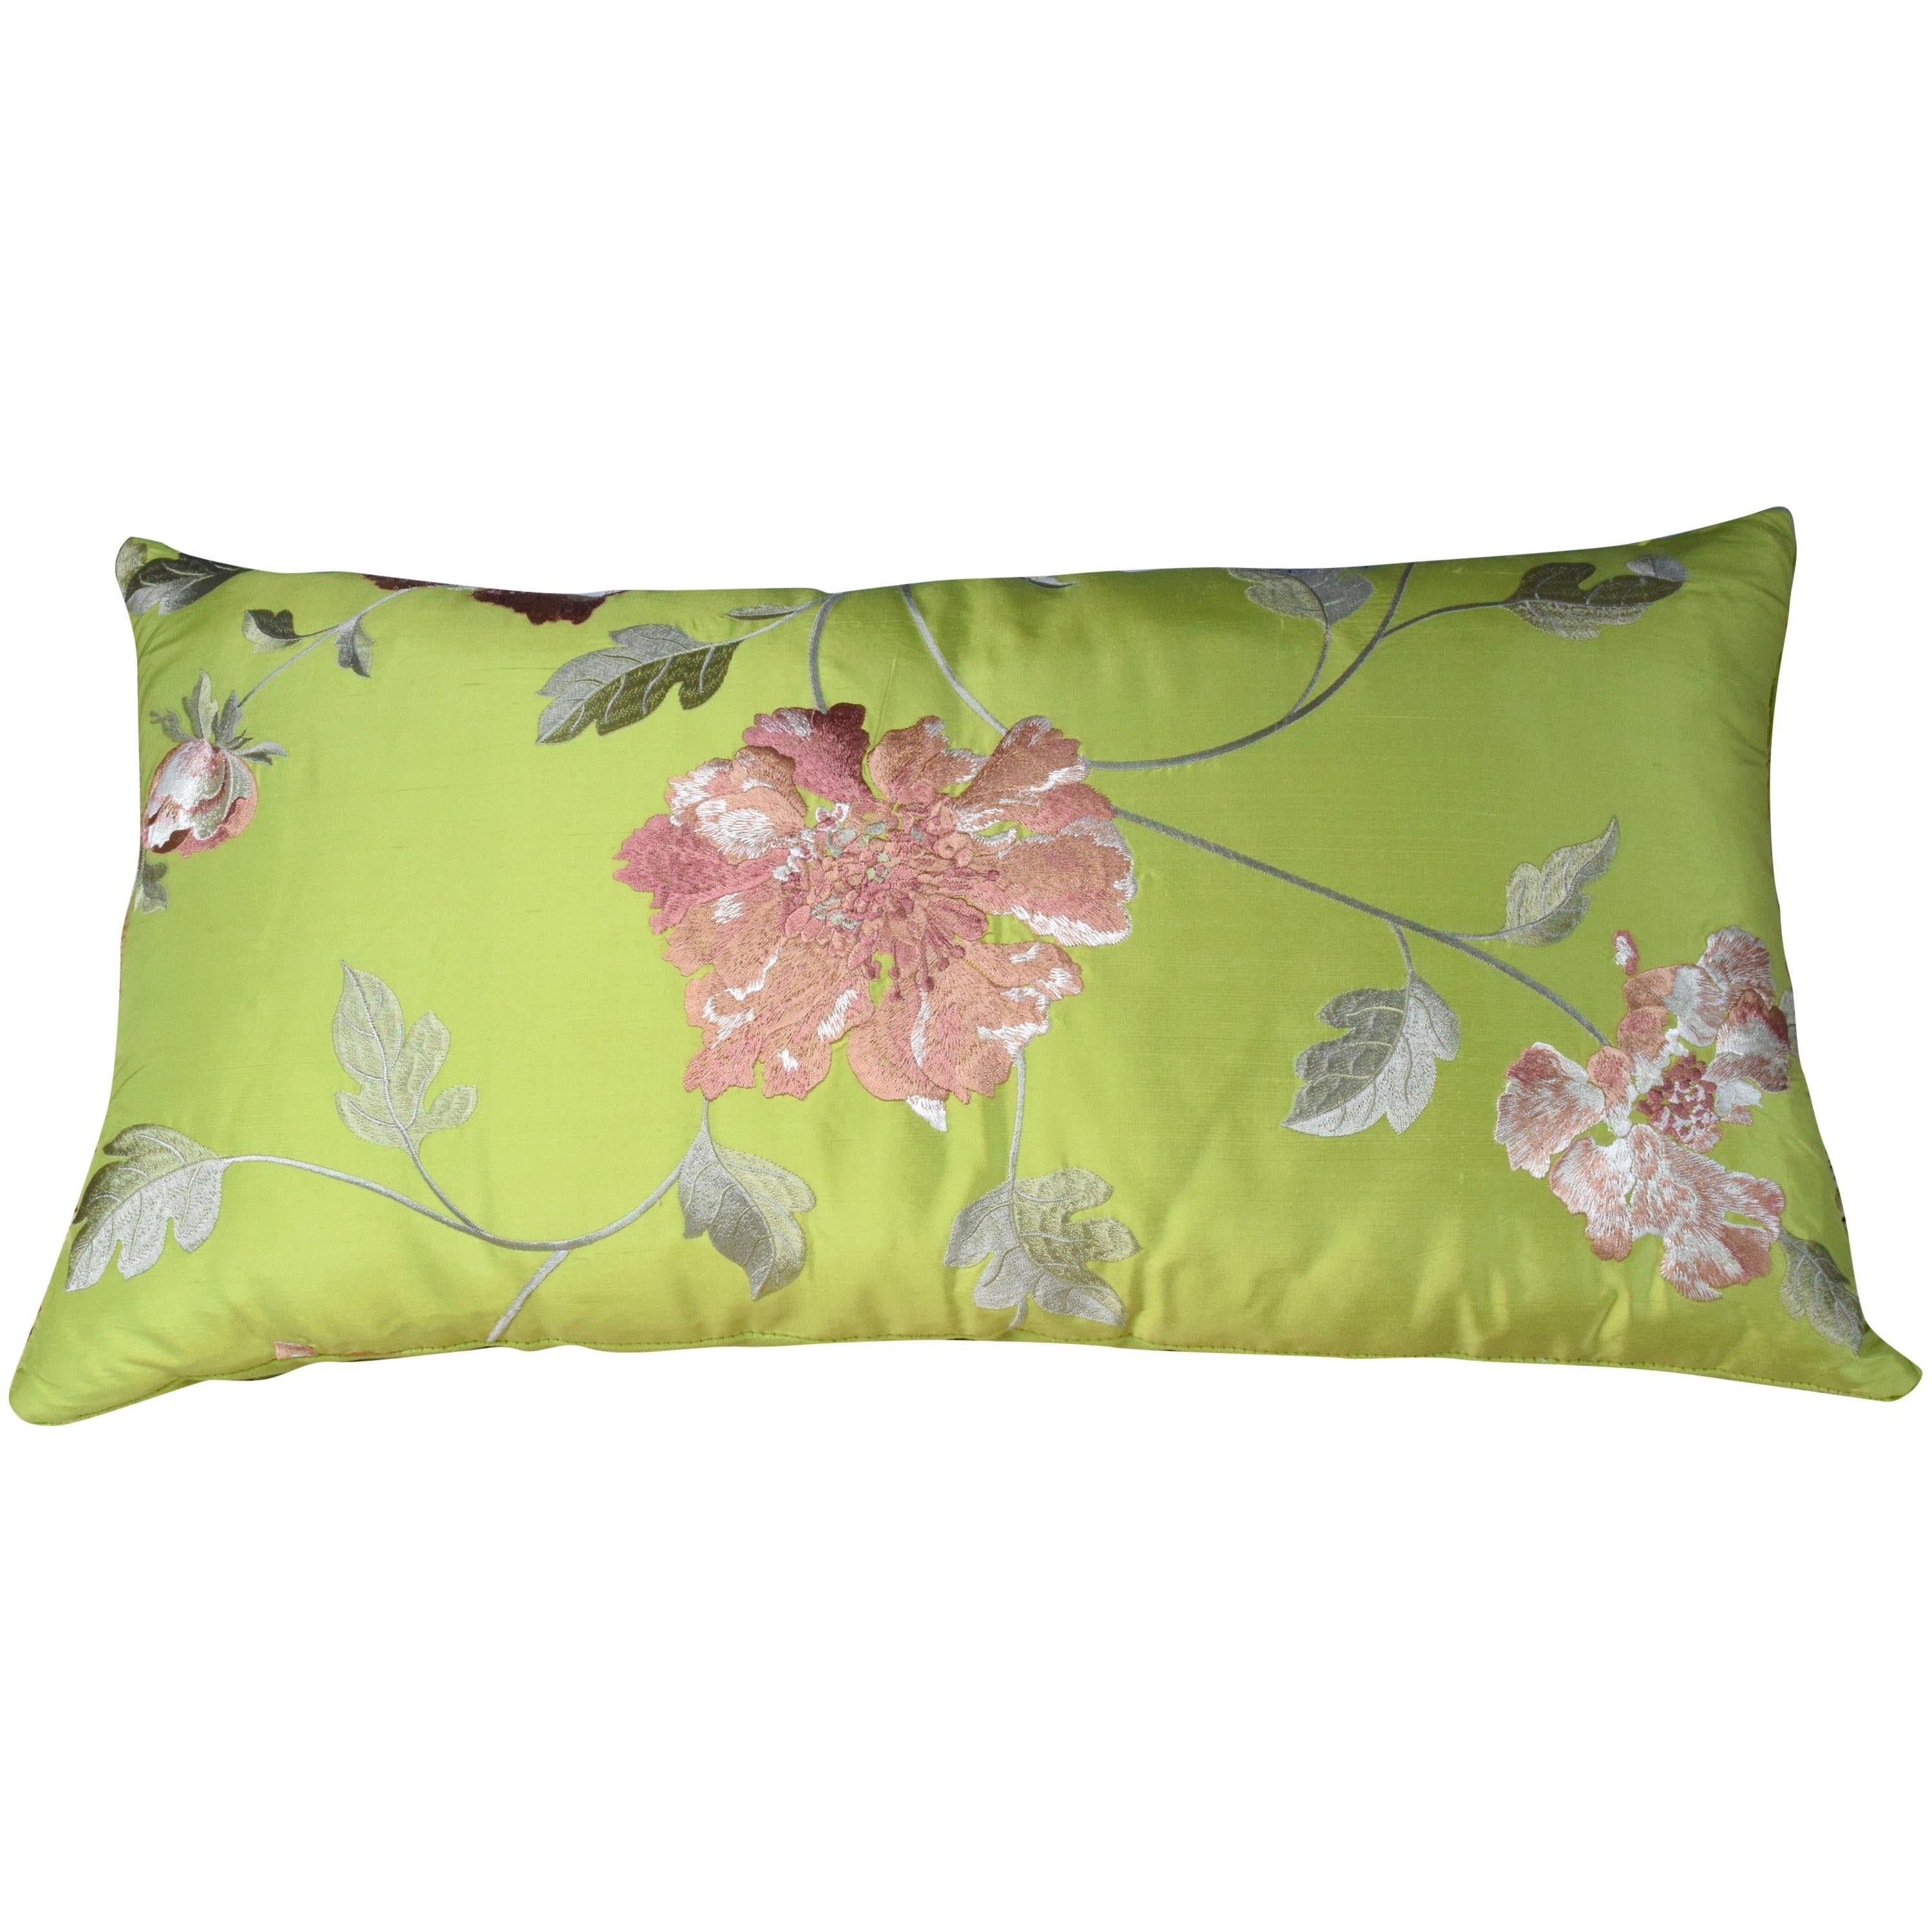 A rectangular lime-green handmade cushion covered in designer silk. The light pink floral embroidered pattern will bring life to the rest of your furniture. The back-side is in velvet.
Our pillows are handmade using limited edition fabrics from